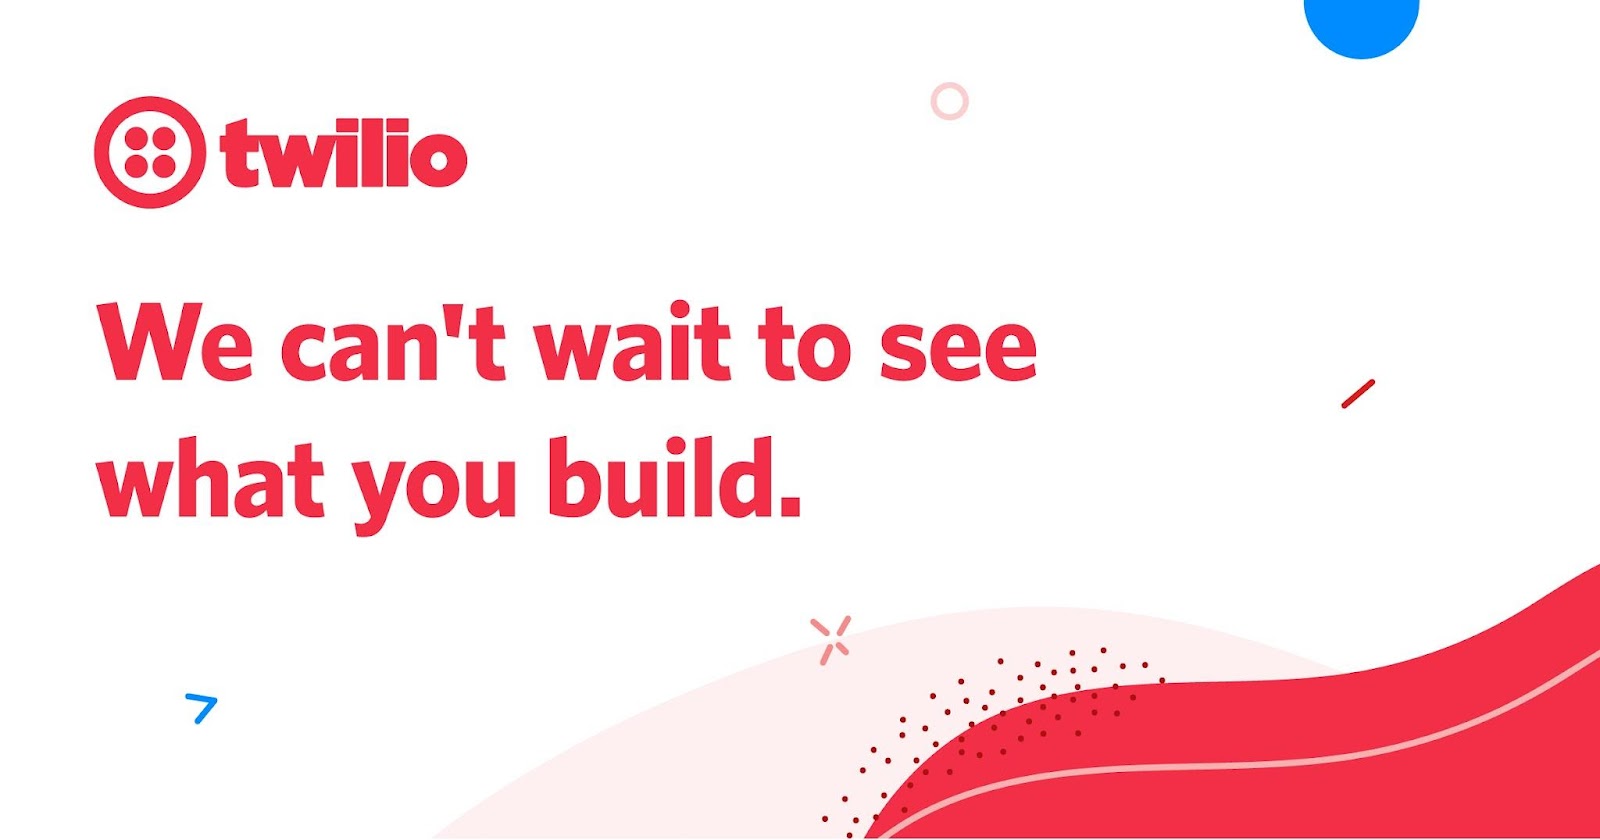 We can"t wait to see what you build